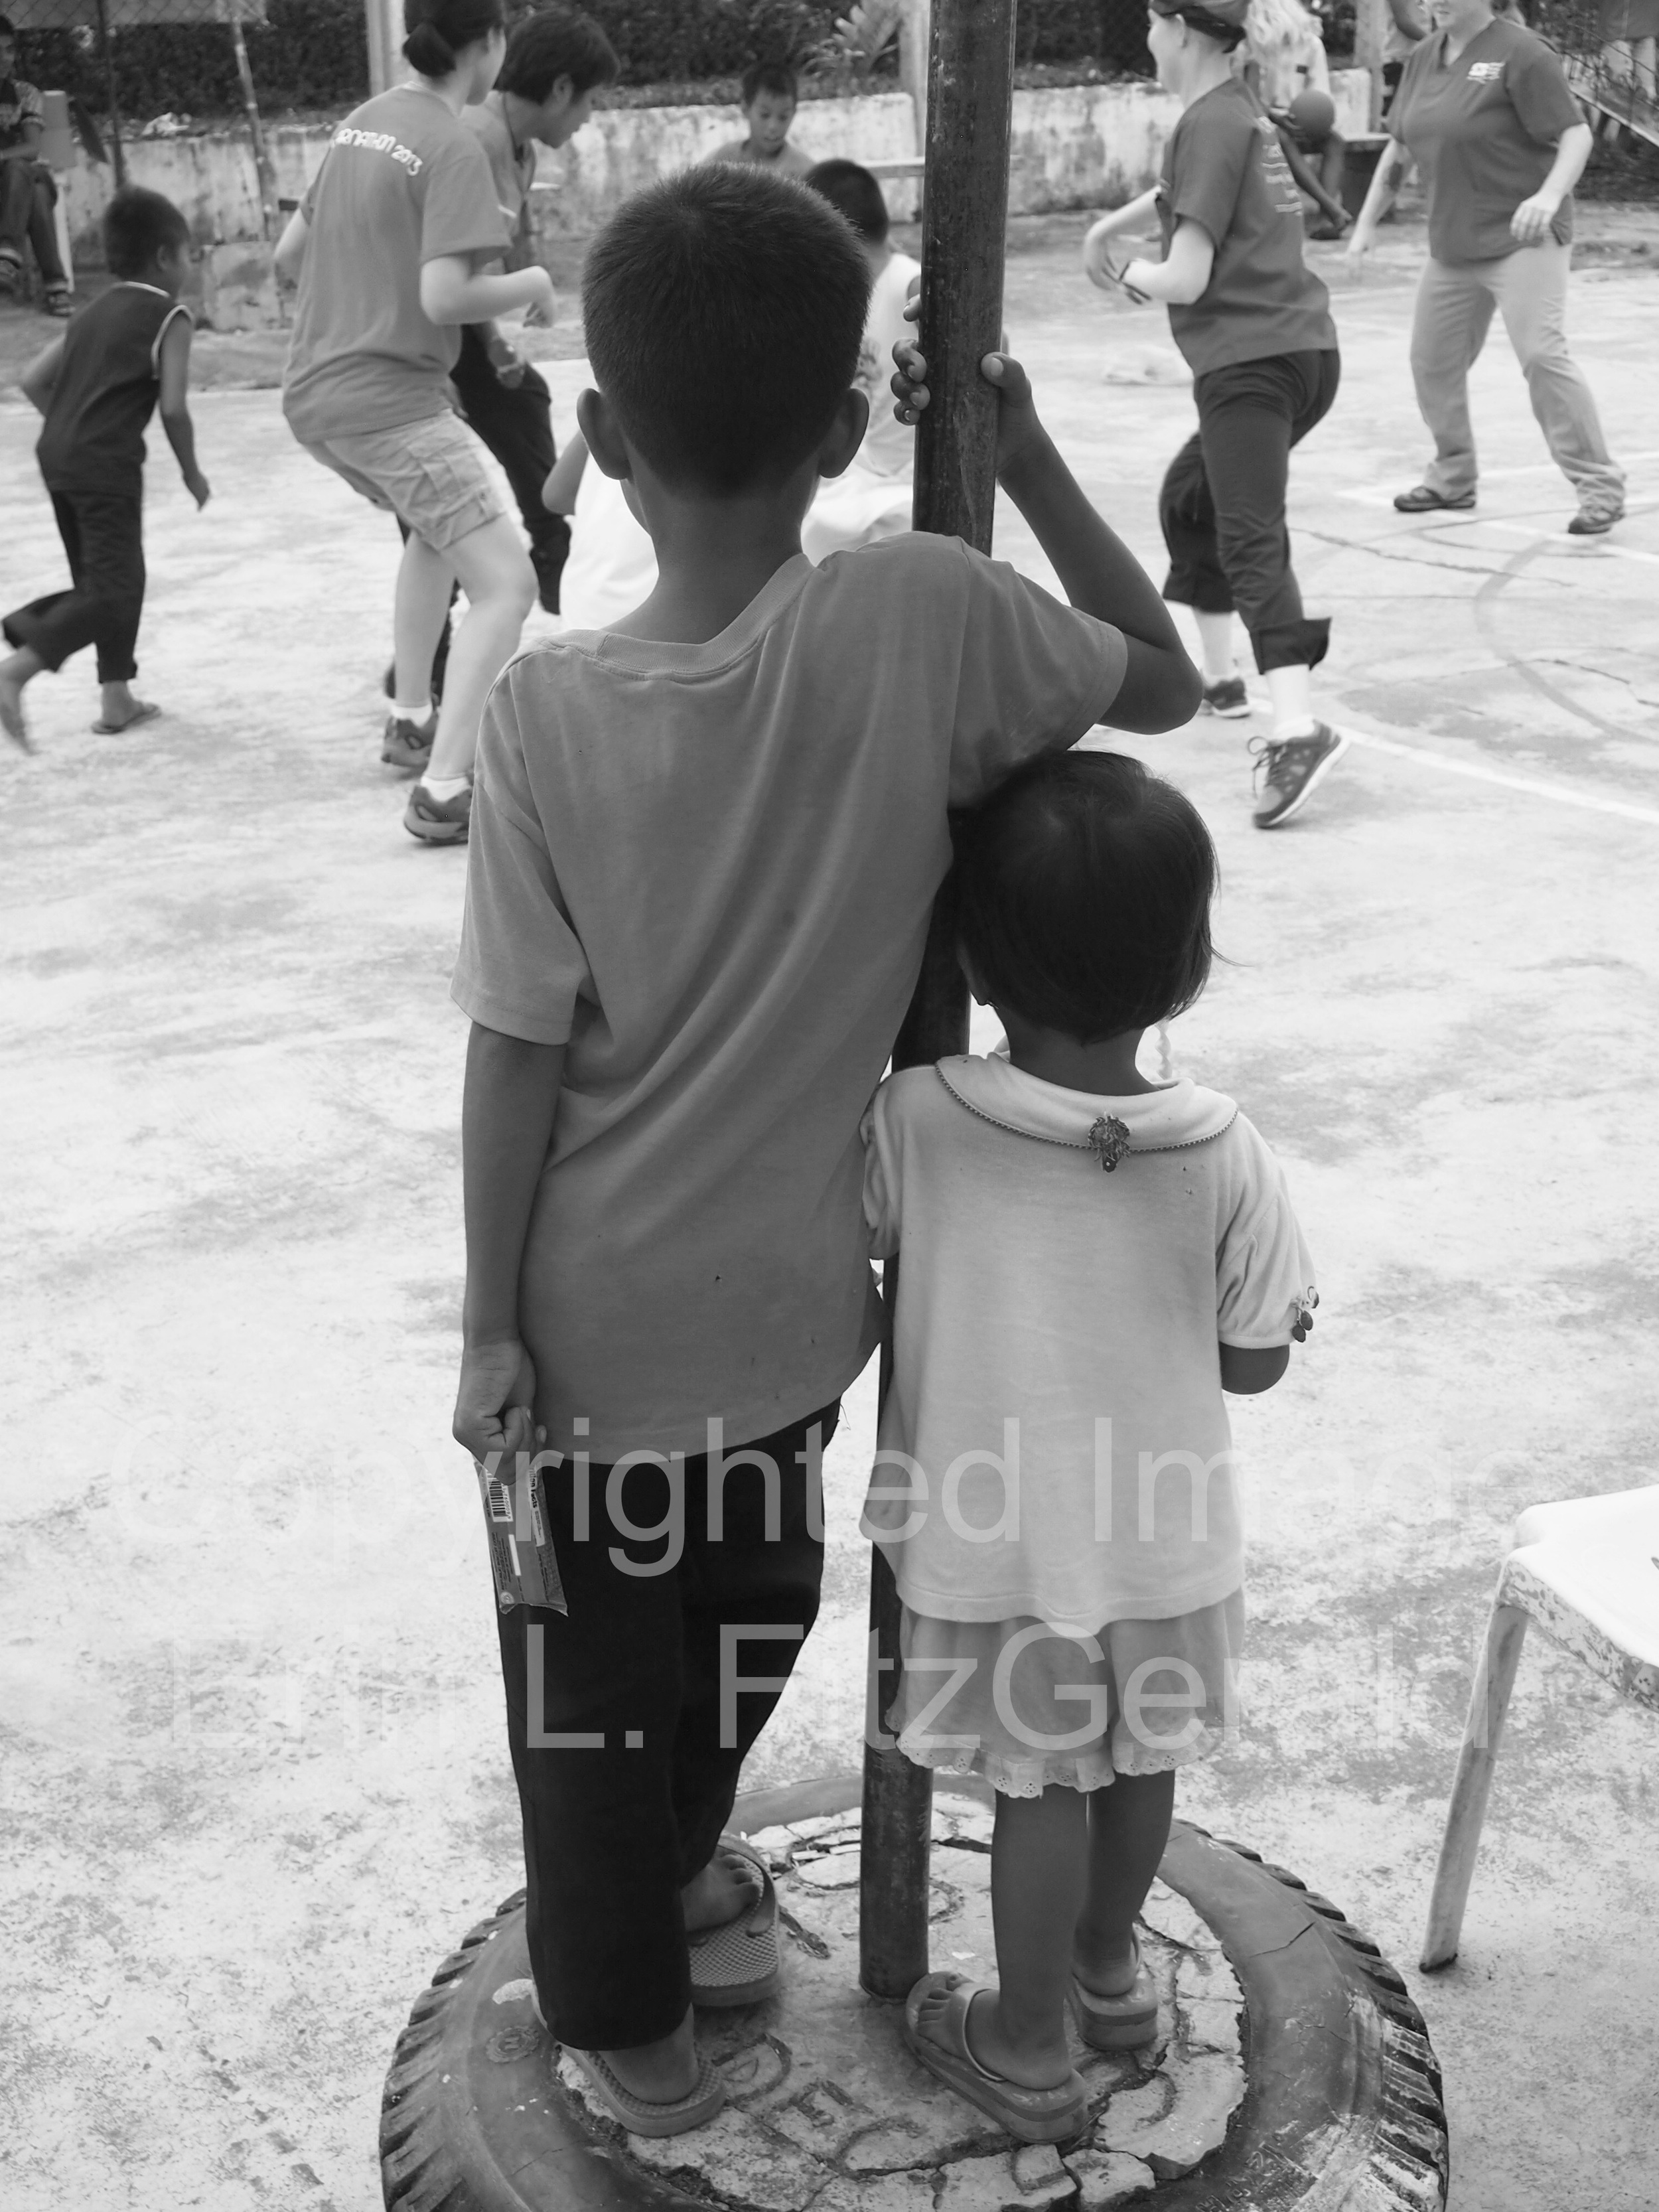   Two children watch as healthcare workers join with the local community for a post-clinic game of soccer.  